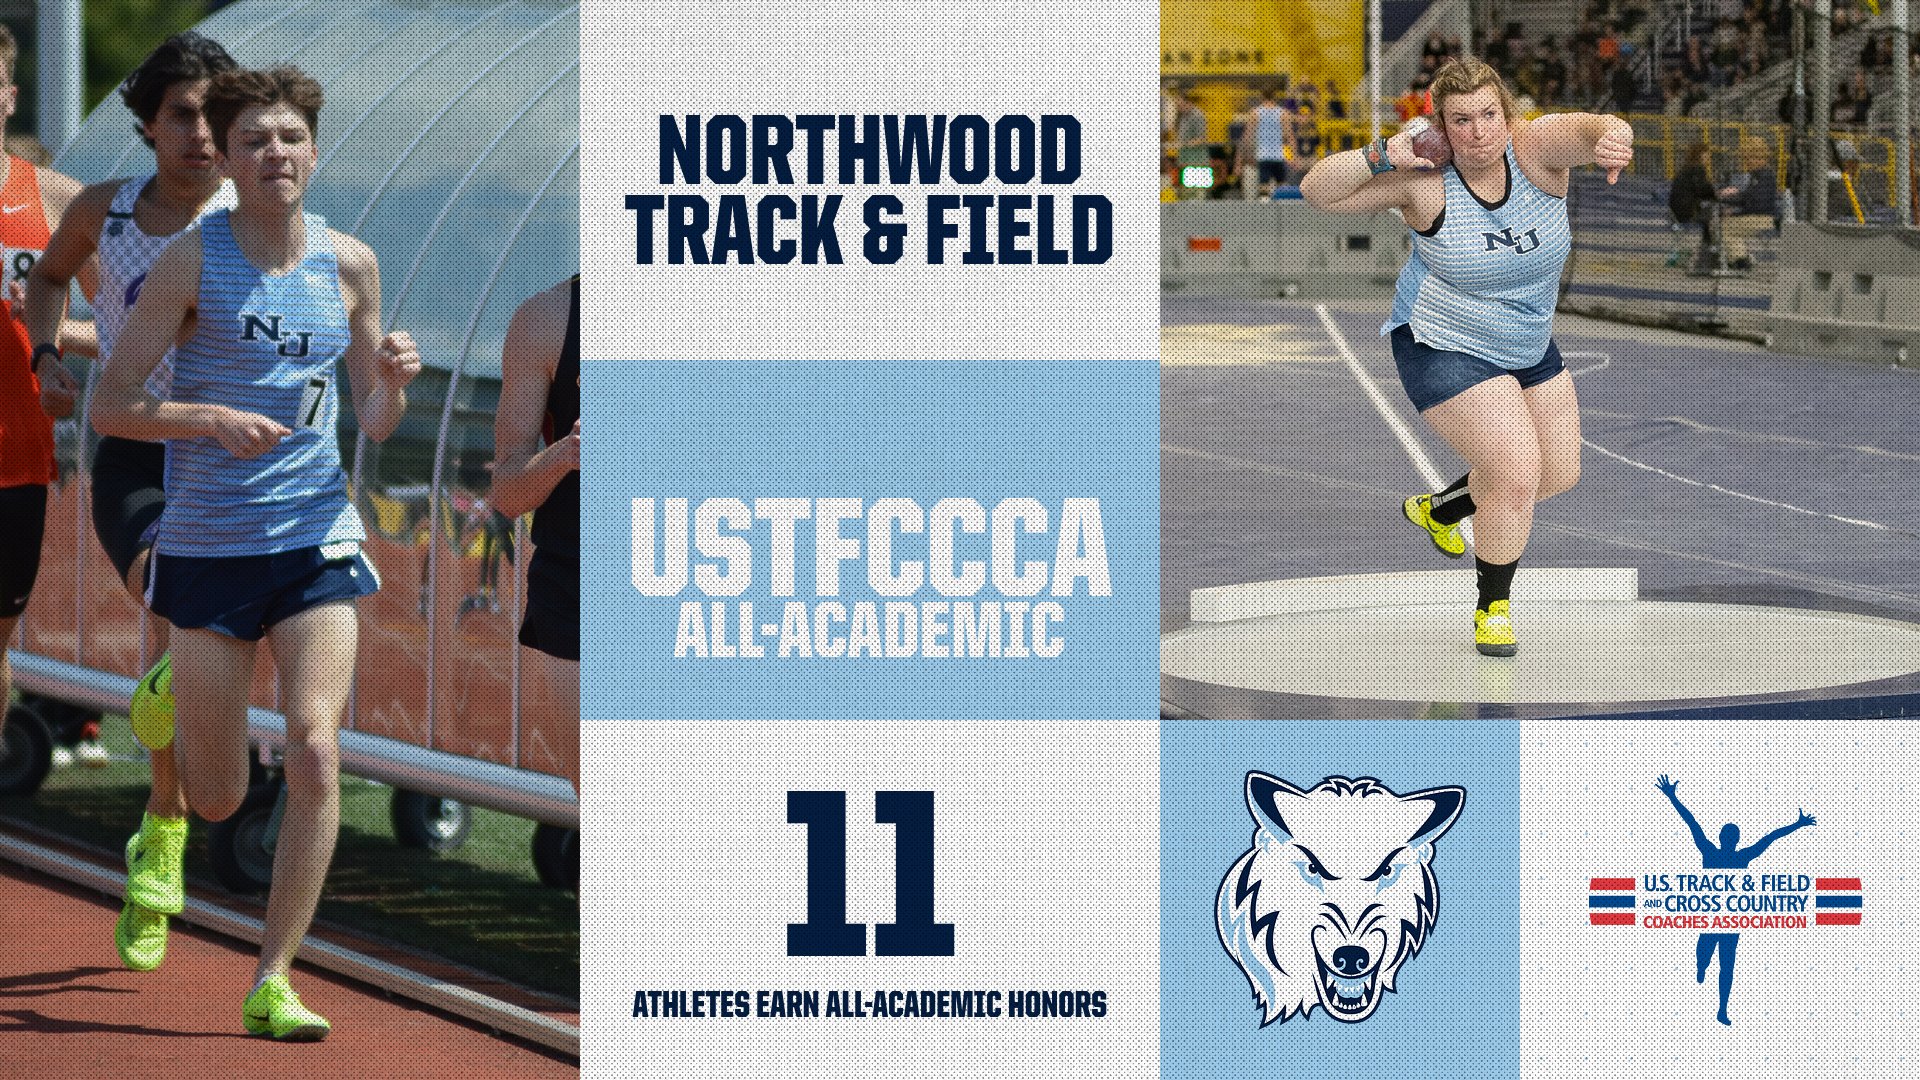 Track & Field Has 11 Athletes Earn All-Academic Honors By USTFCCCA